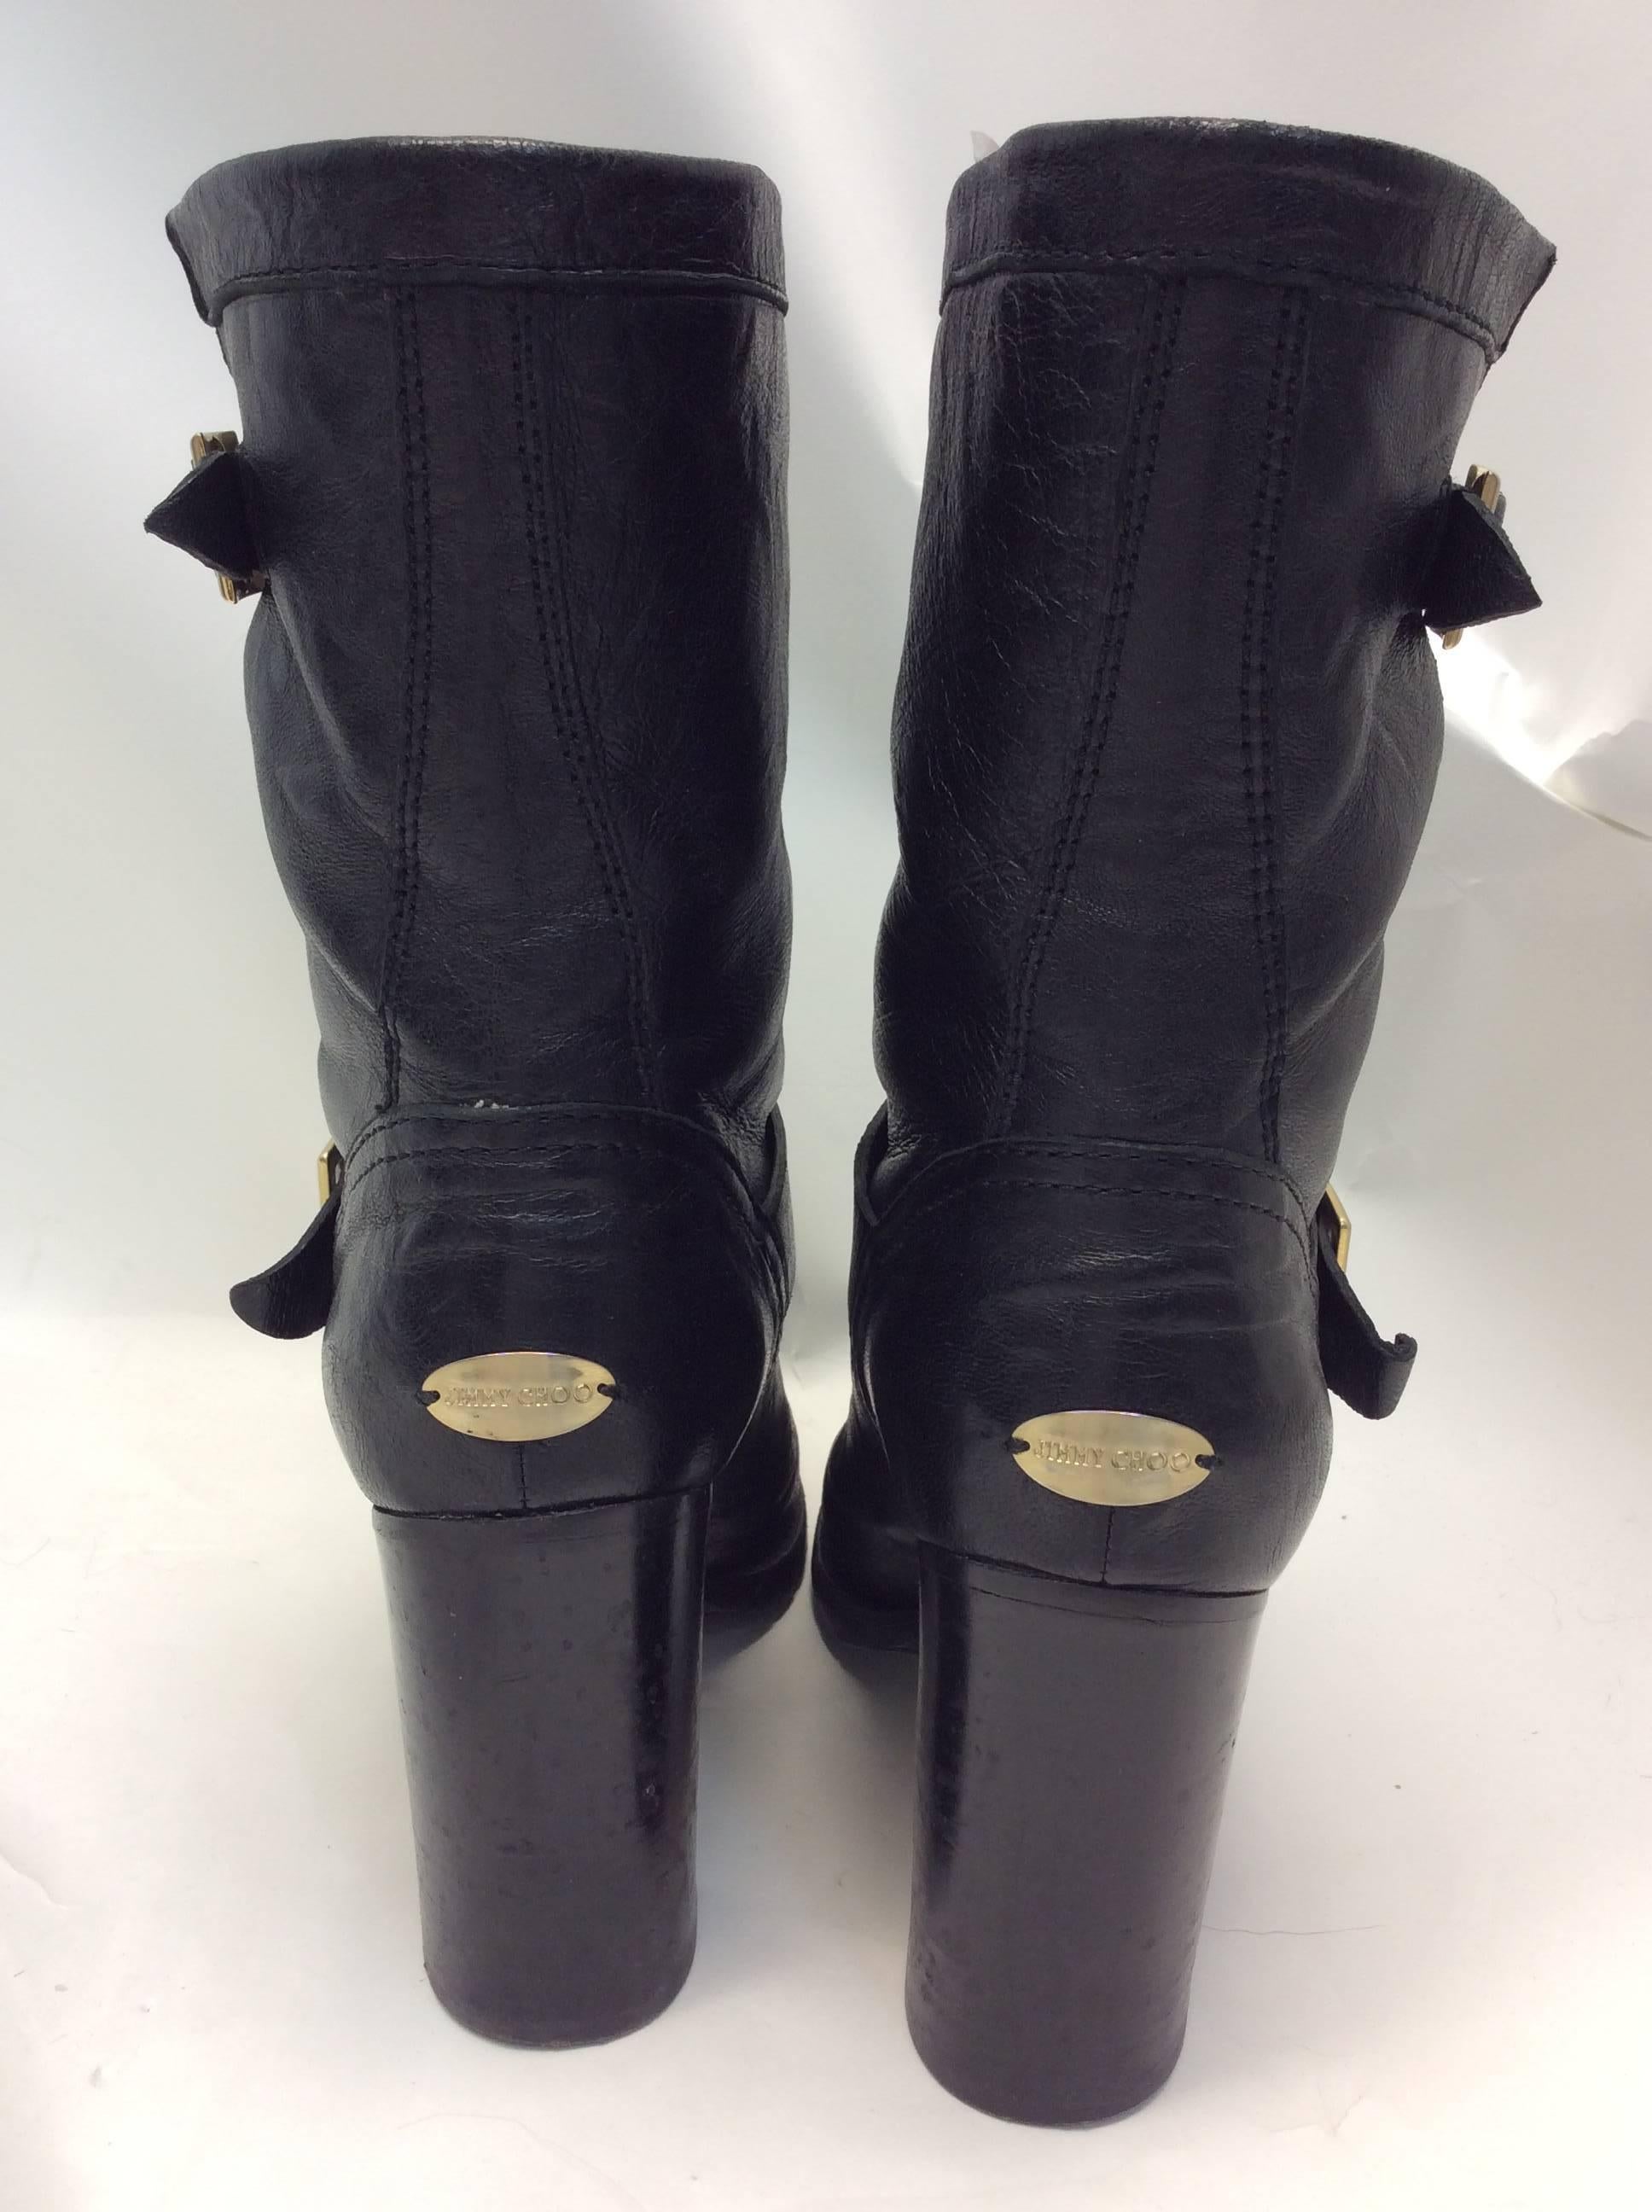 Jimmy Choo Black Leather Buckle Ankle Boots In Excellent Condition For Sale In Narberth, PA